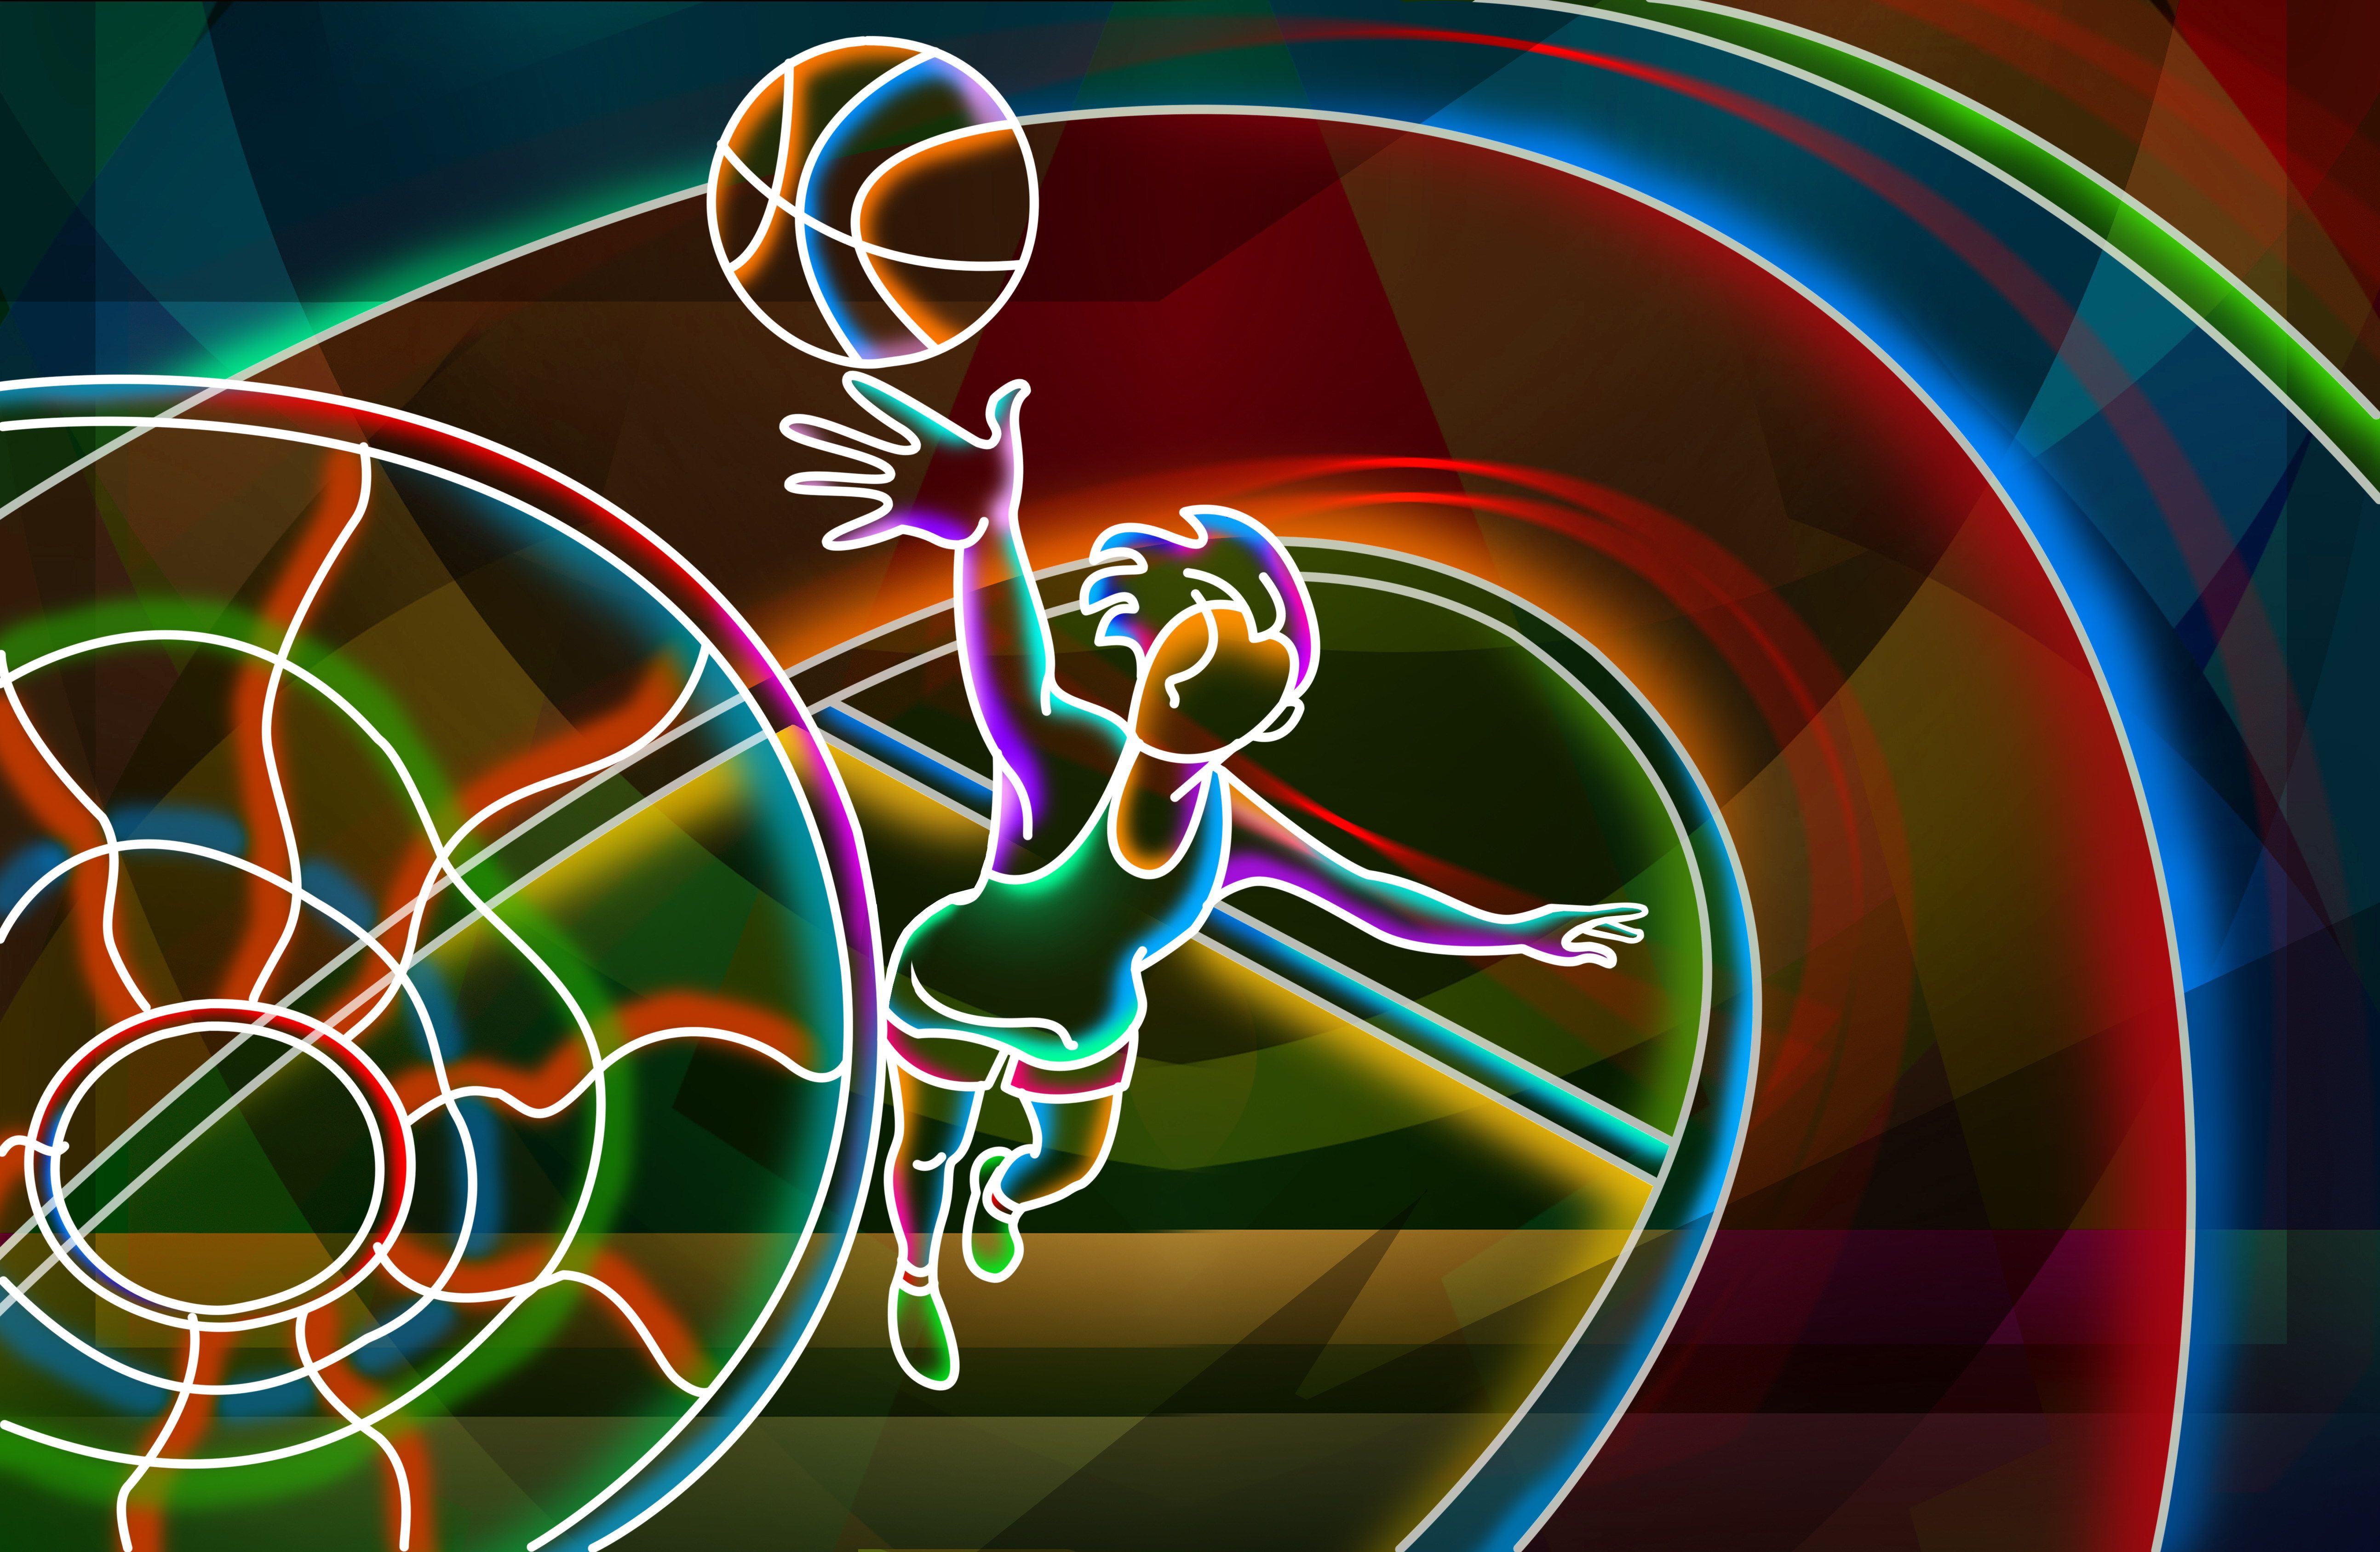 Basketball player wallpaper and image, picture, photo